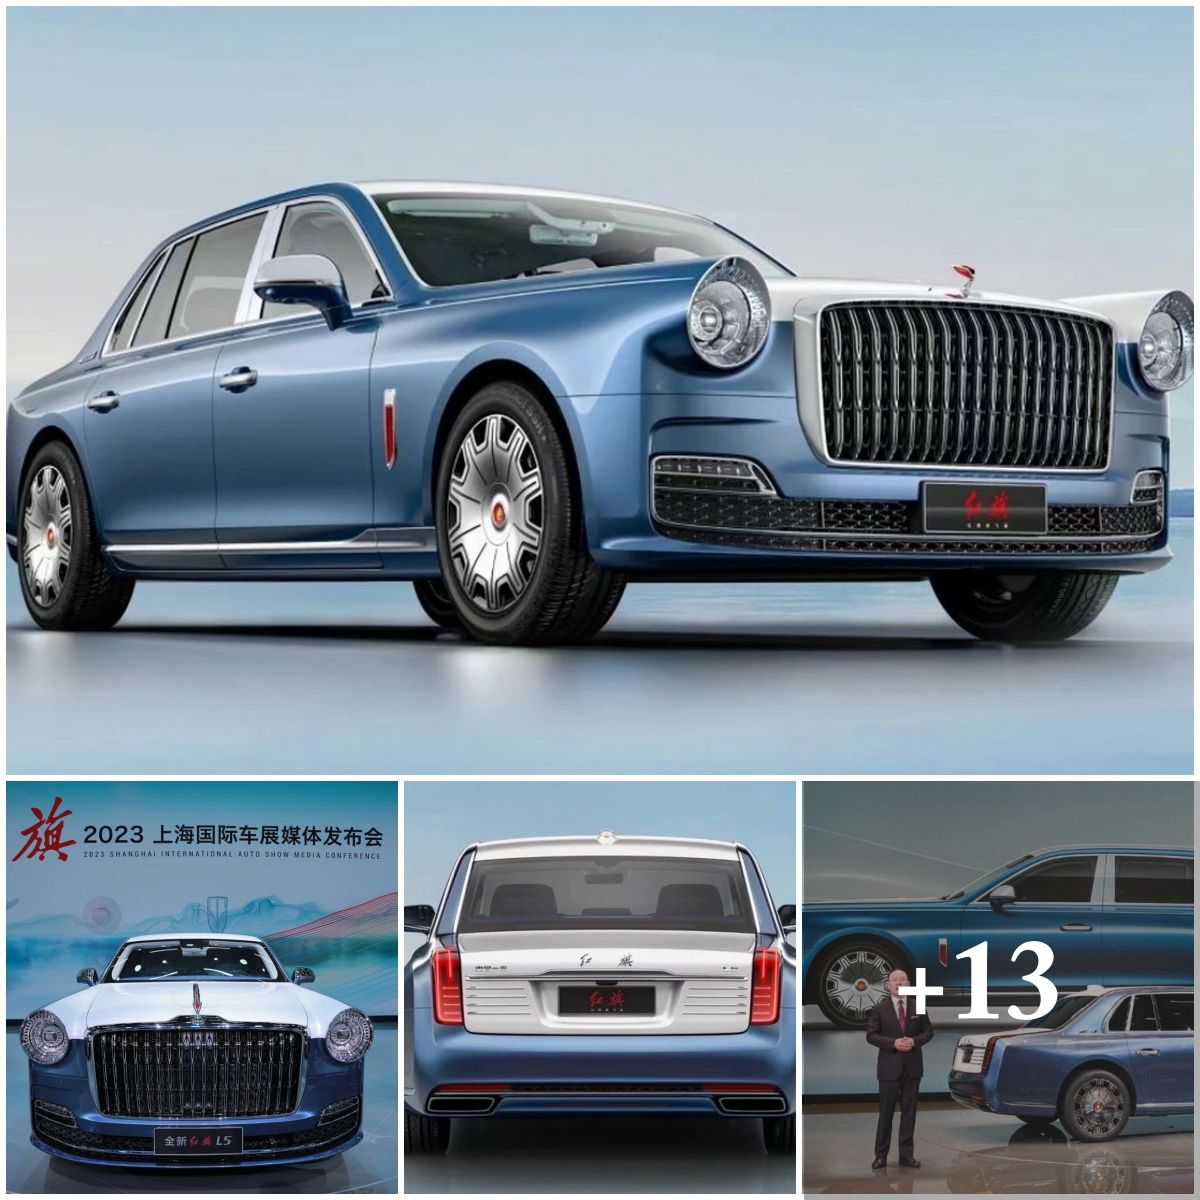 Hongqi L5 2023 Debuts in China, Continuing its Rolls-Royce Inspired Legacy